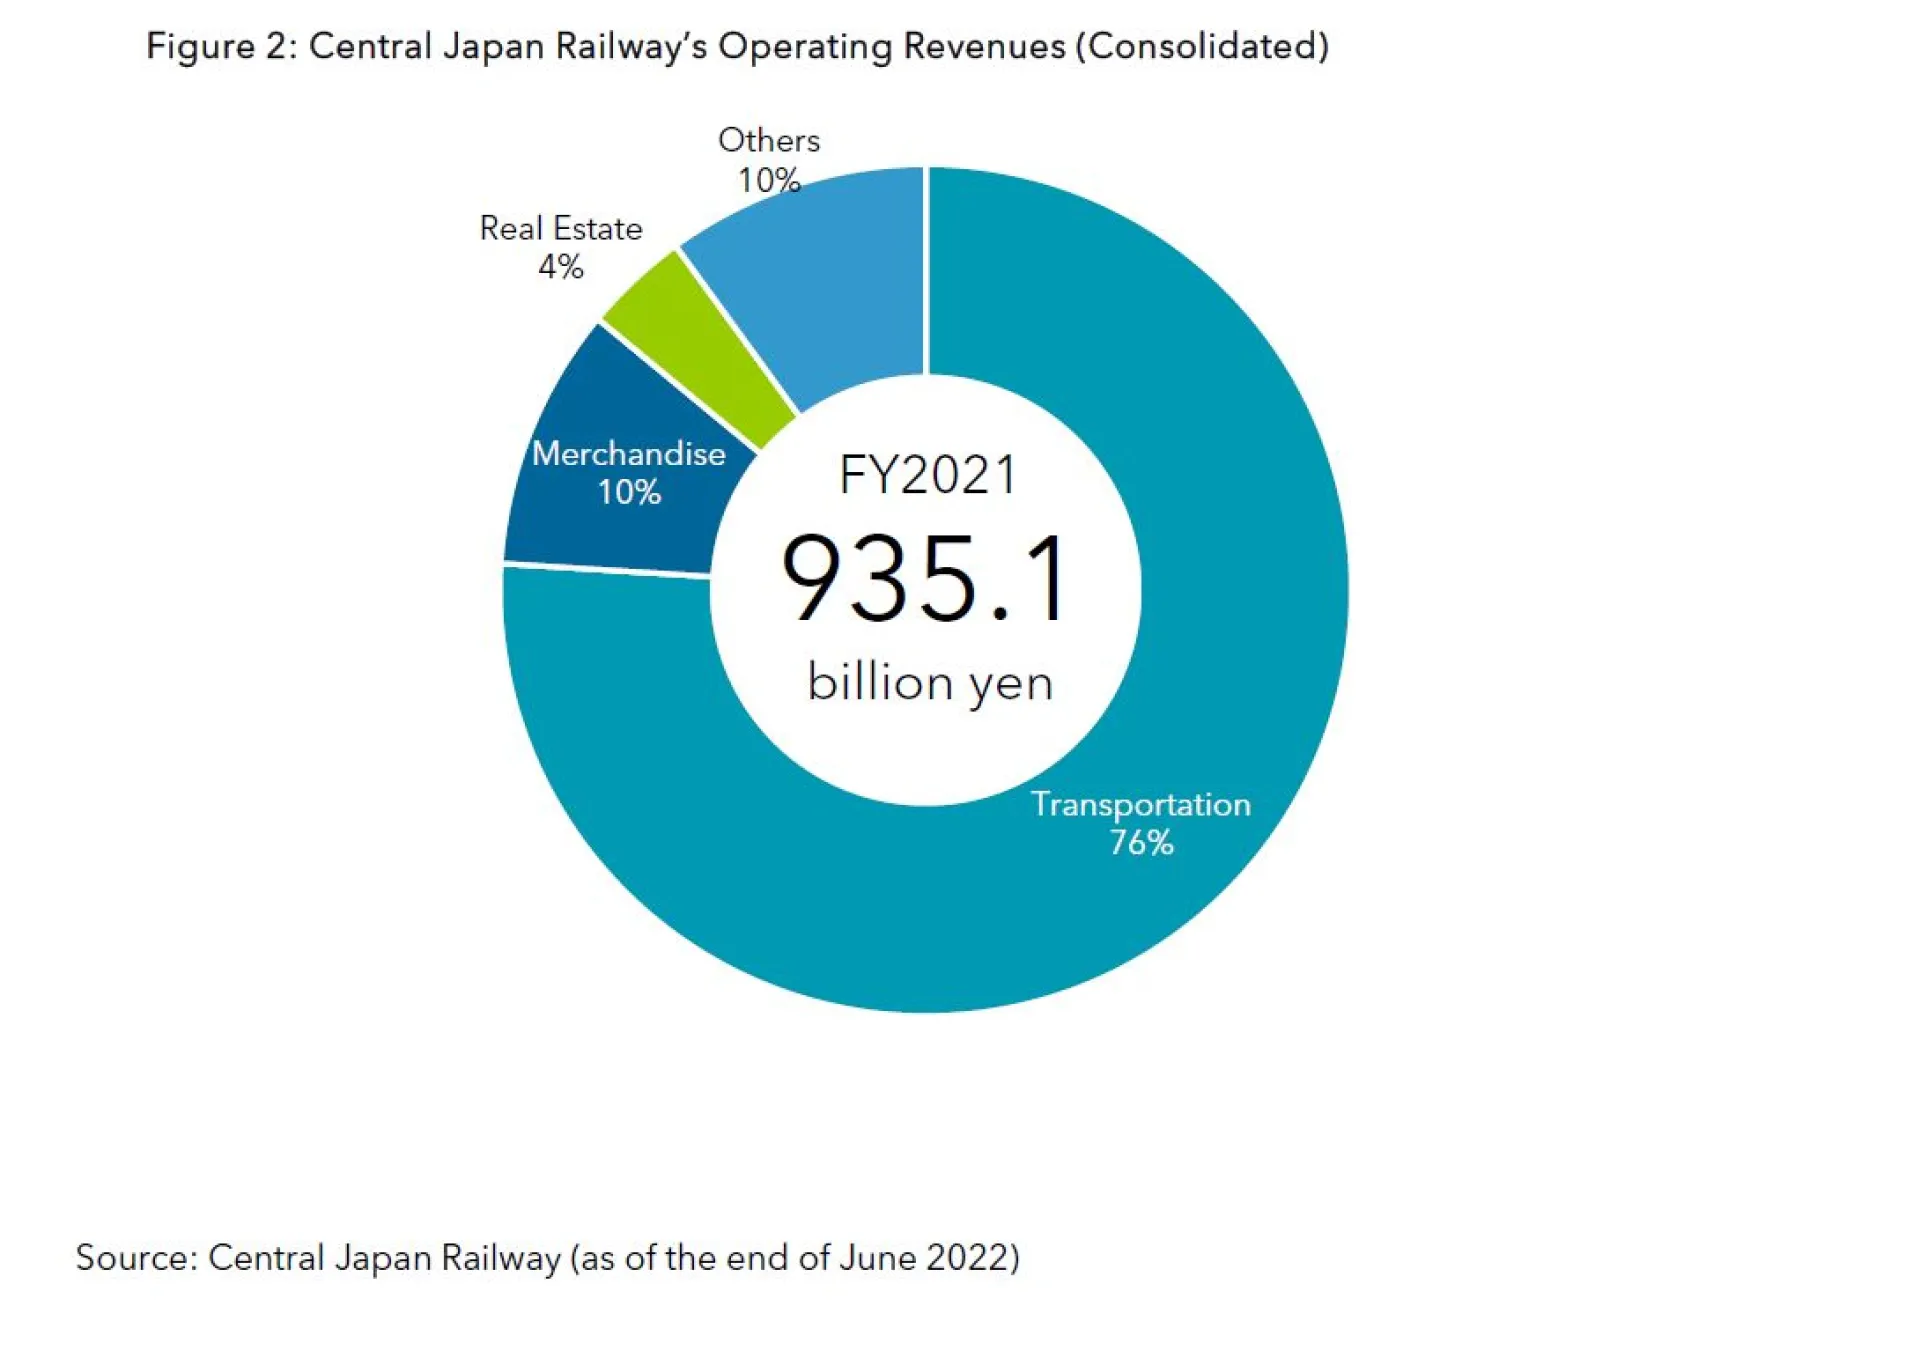 Figure 2 - Central Japan Railway’s Operating Revenues (Consolidated)